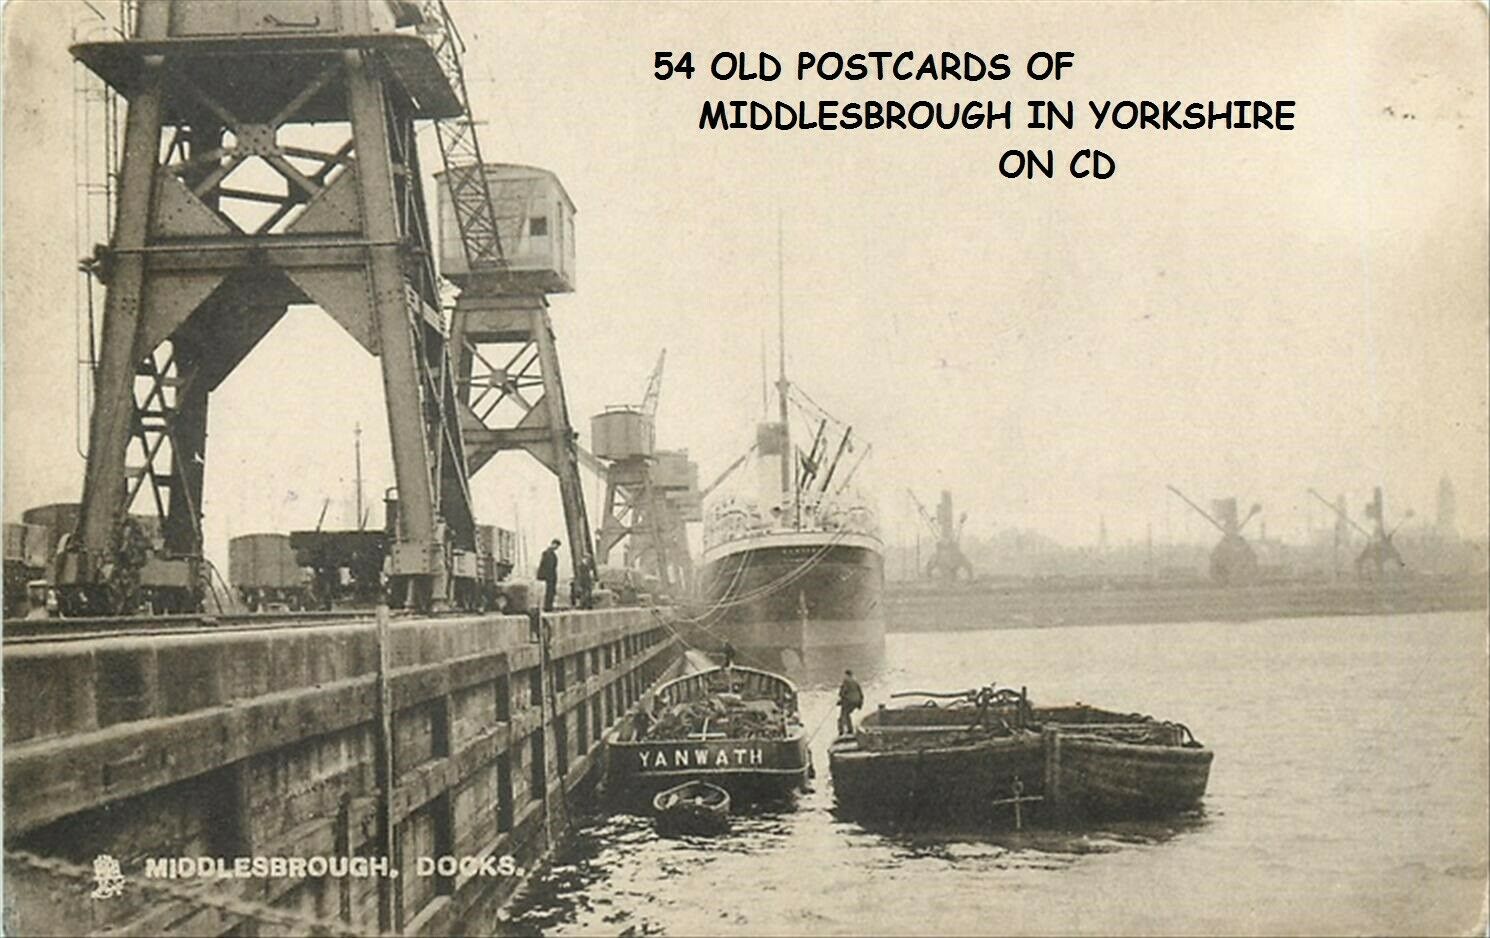 House Clearance - 54 OLD VINTAGE POSTCARDS OF MIDDLESBROUGH IN YORKSHIRE ON CD